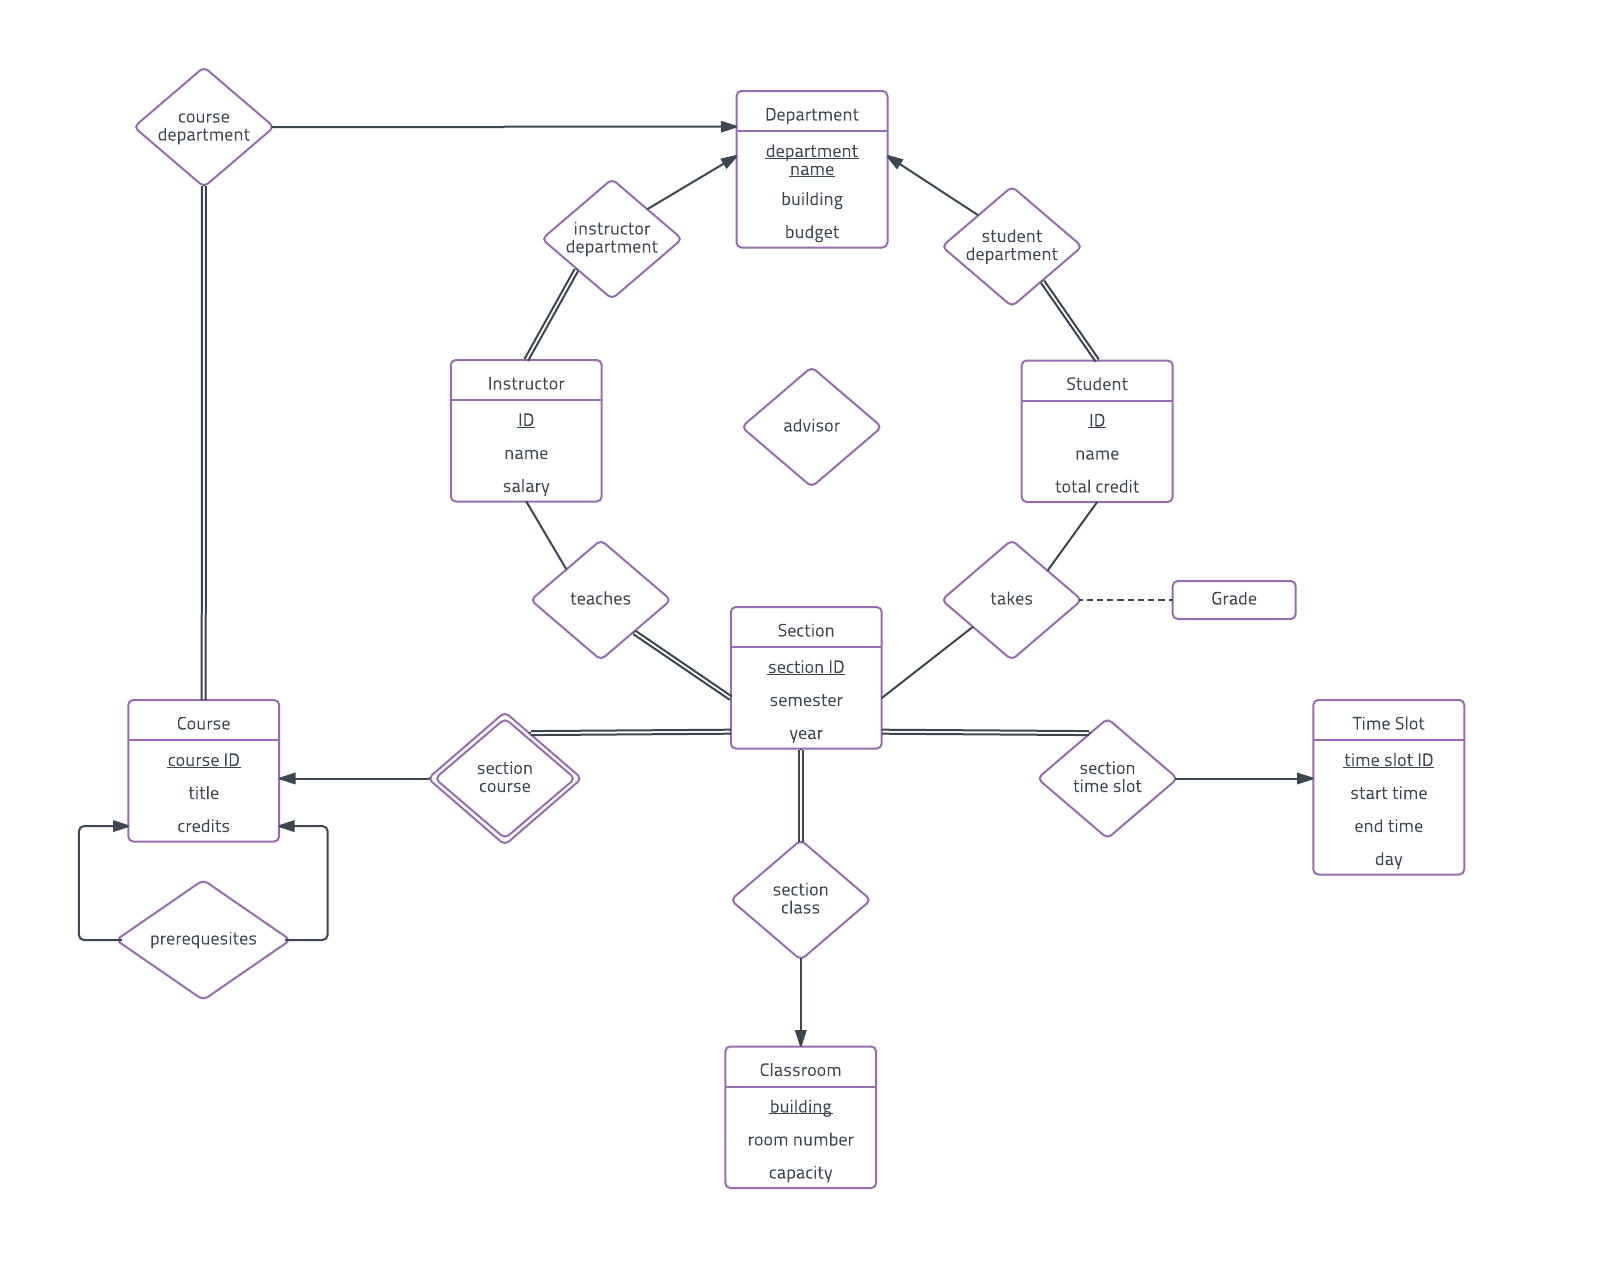 Er Diagram Examples And Templates | Lucidchart within Er Diagram Examples For Hotel Management System